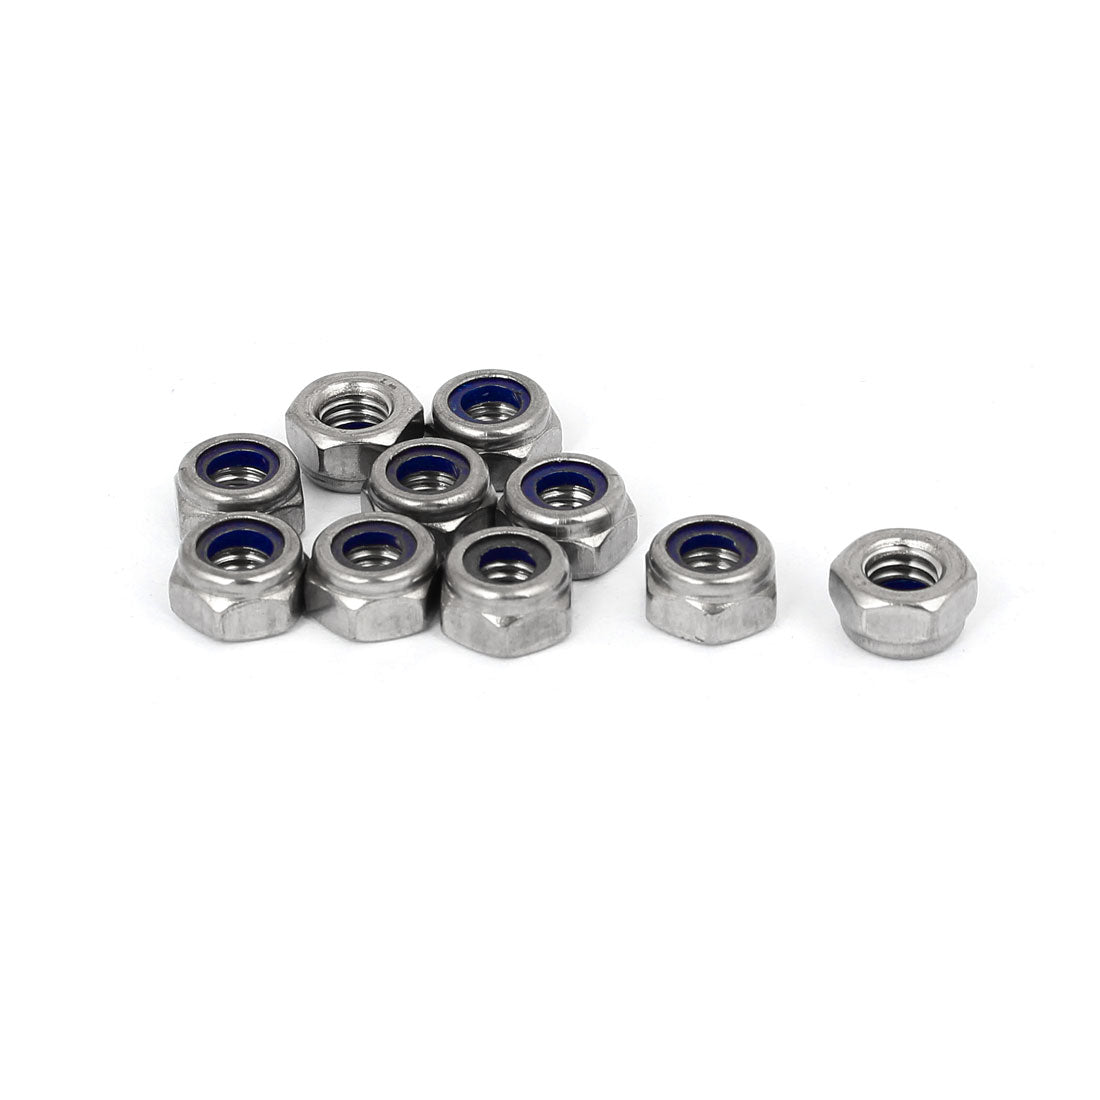 uxcell Uxcell M6 x 1mm 304 Stainless Steel Nylock Nylon Insert Hex Lock Nut 10PCS